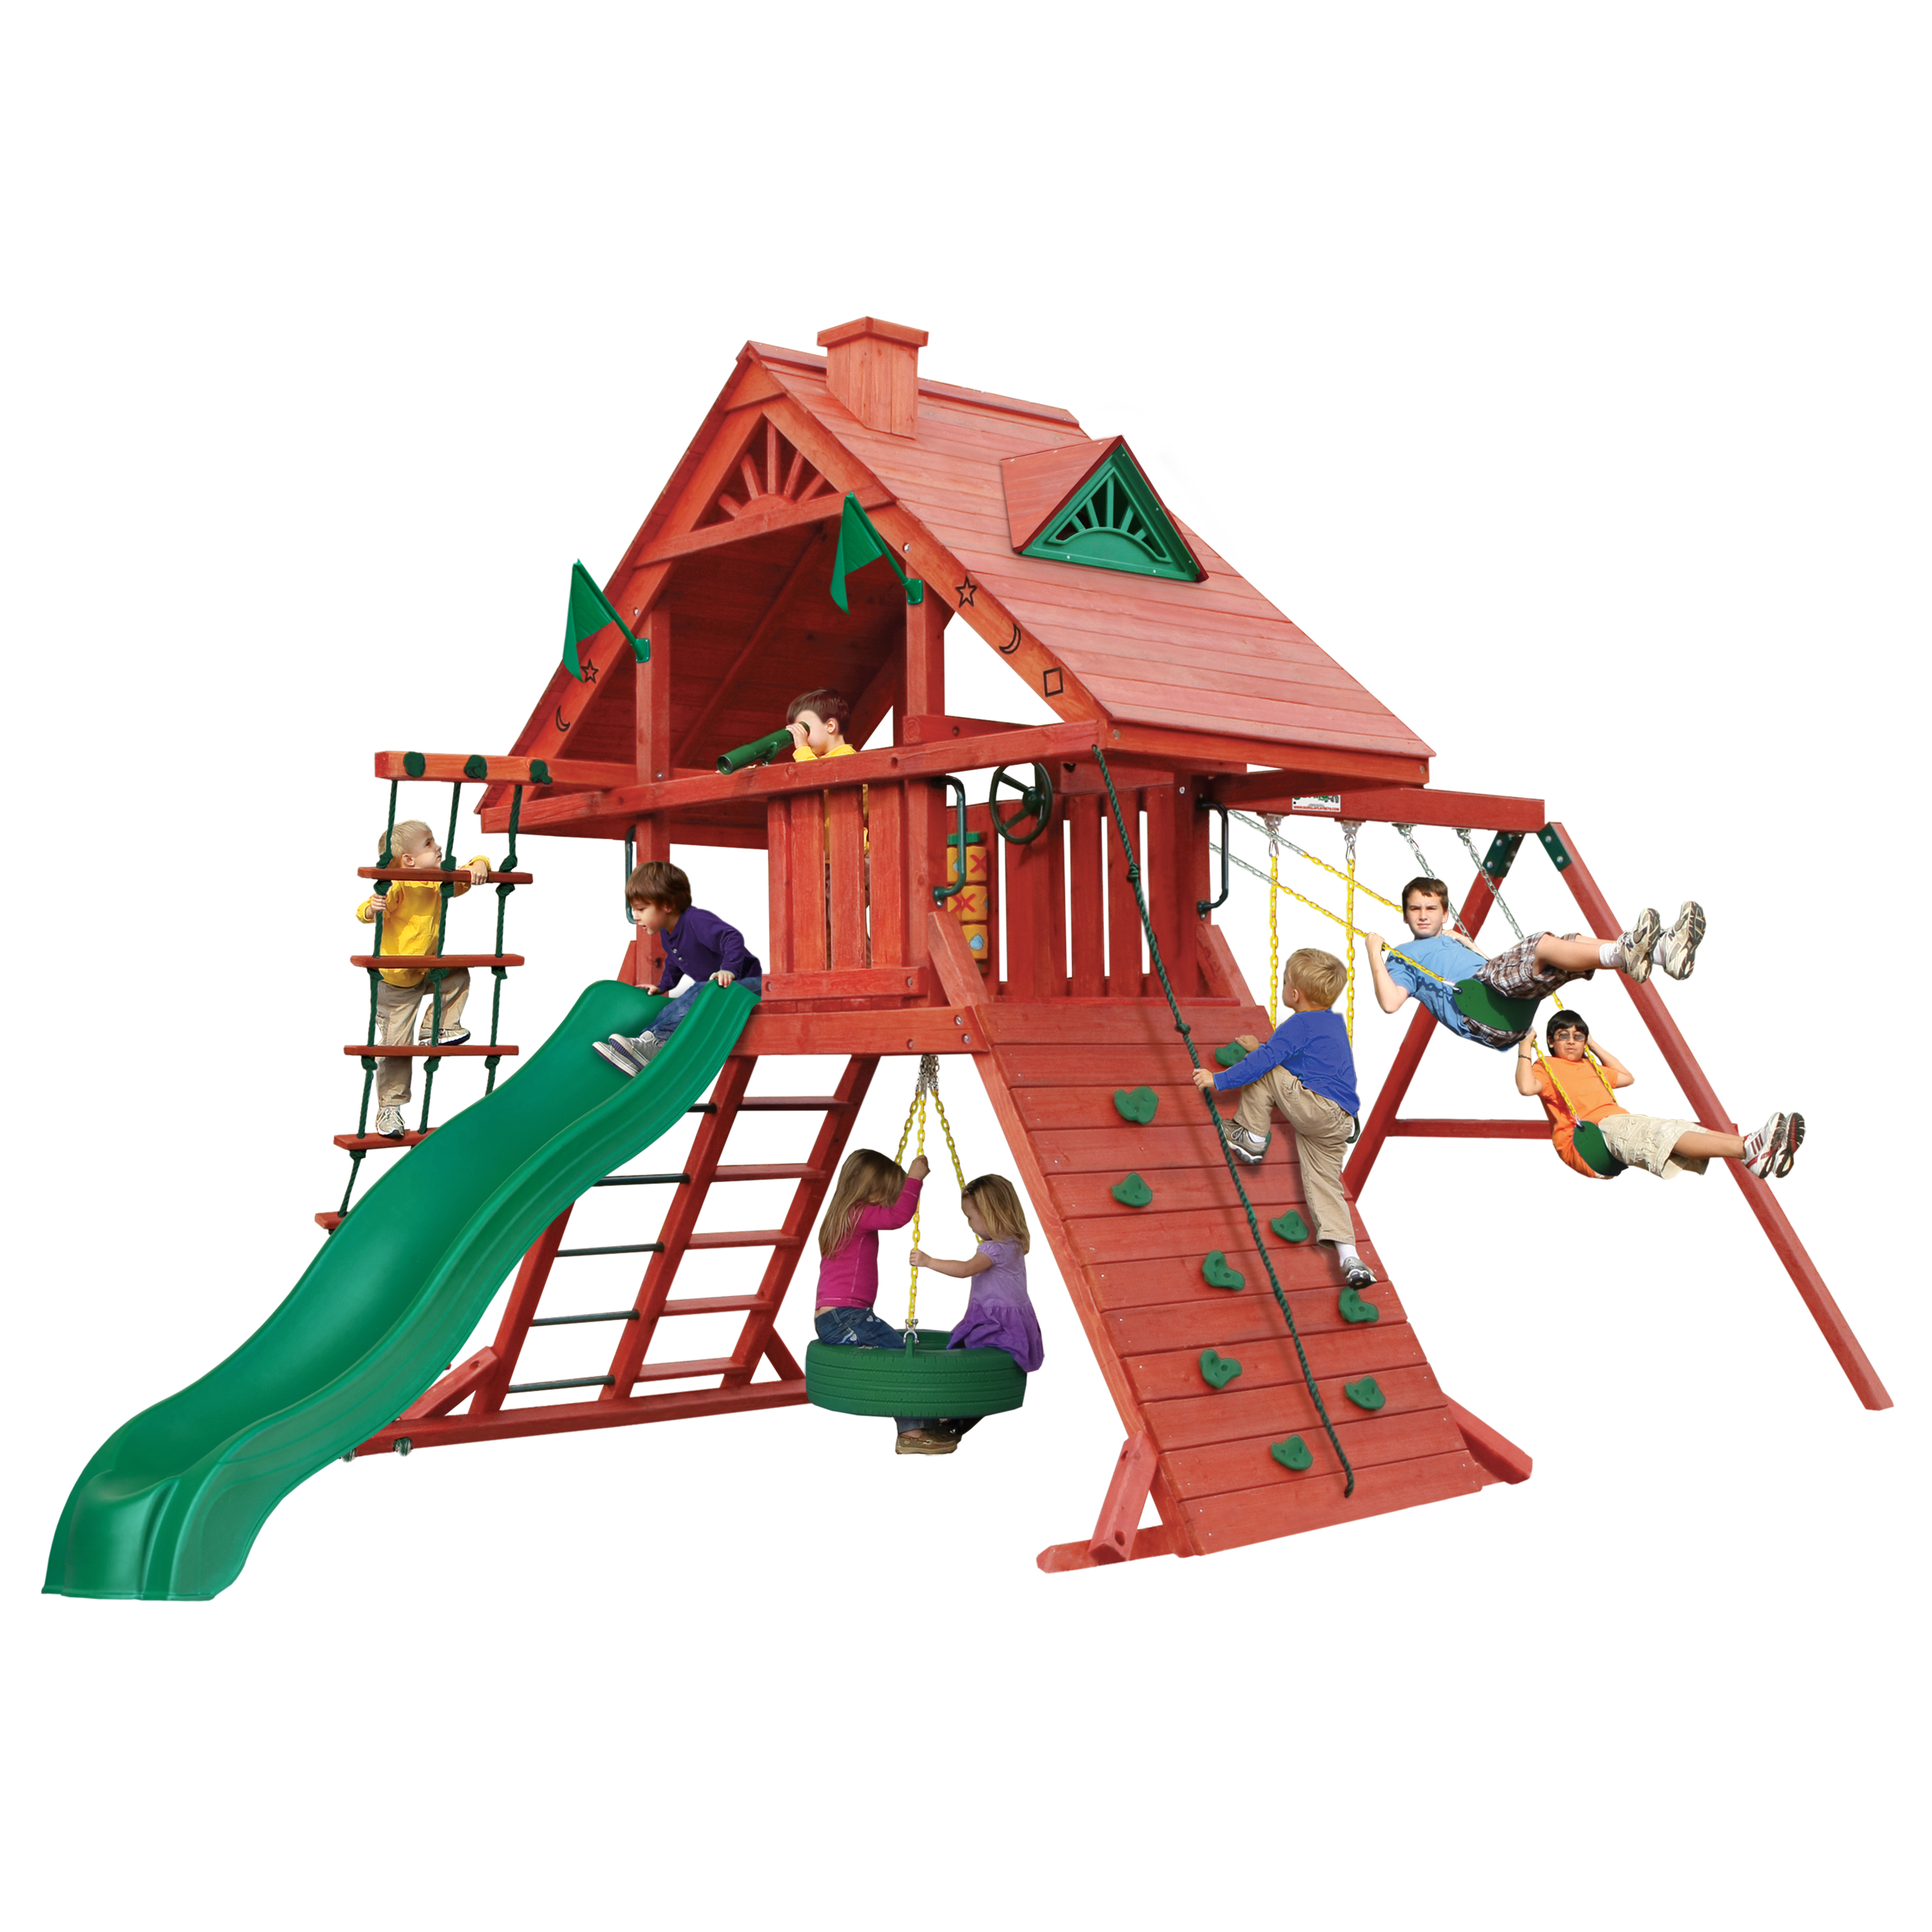 Gorilla Playsets Sun Palace I Wooden Swing Set with Tire Swing, Extra Large Rock Climbing Wall, and Rope Ladder - image 1 of 11